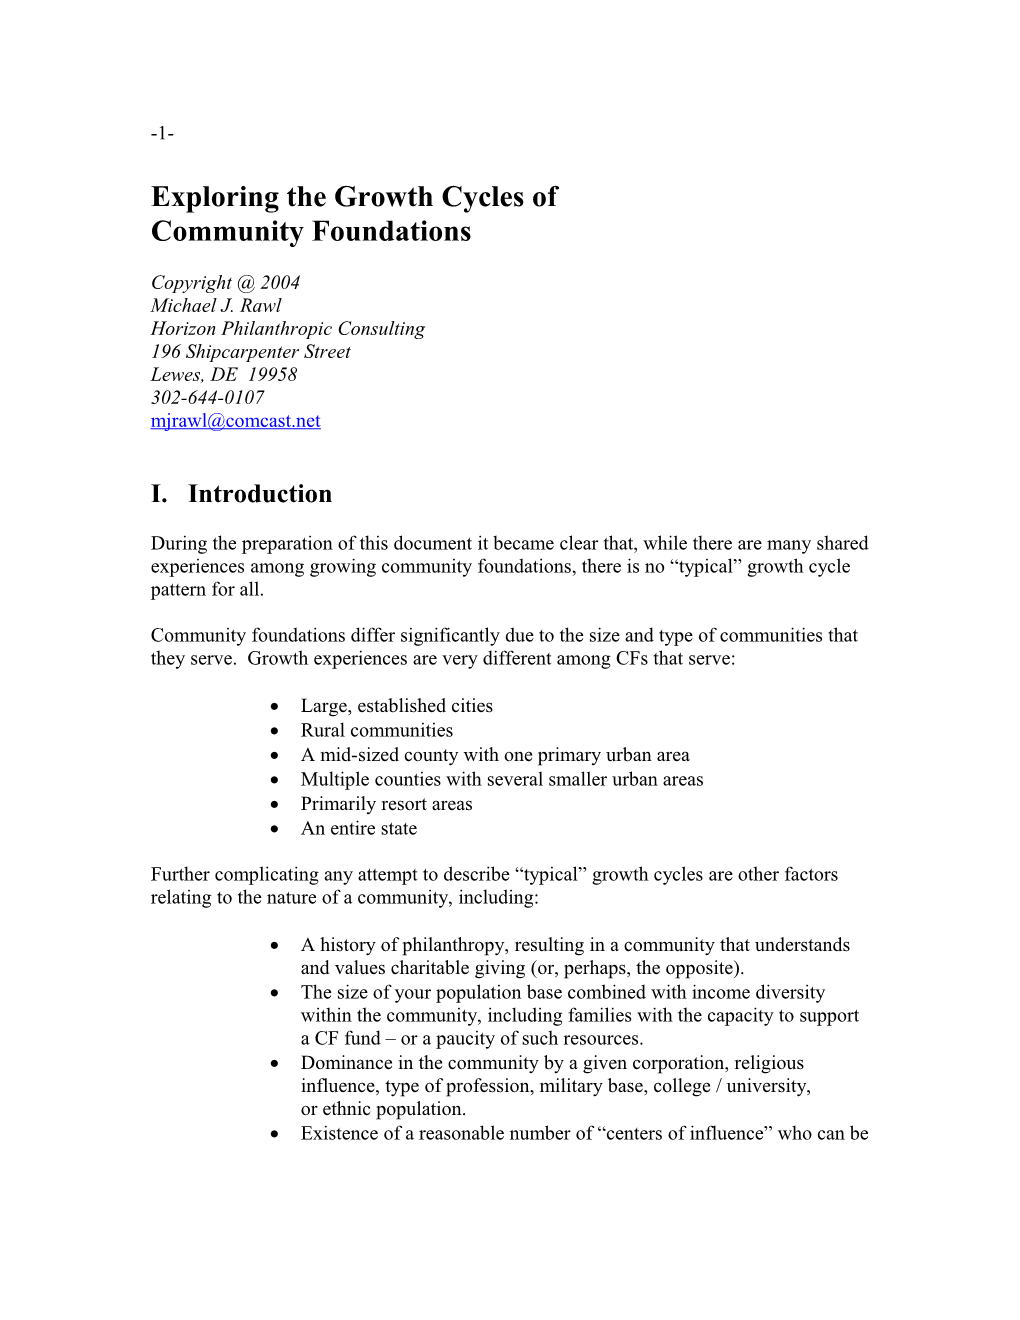 Growth Cycles of Community Foundations